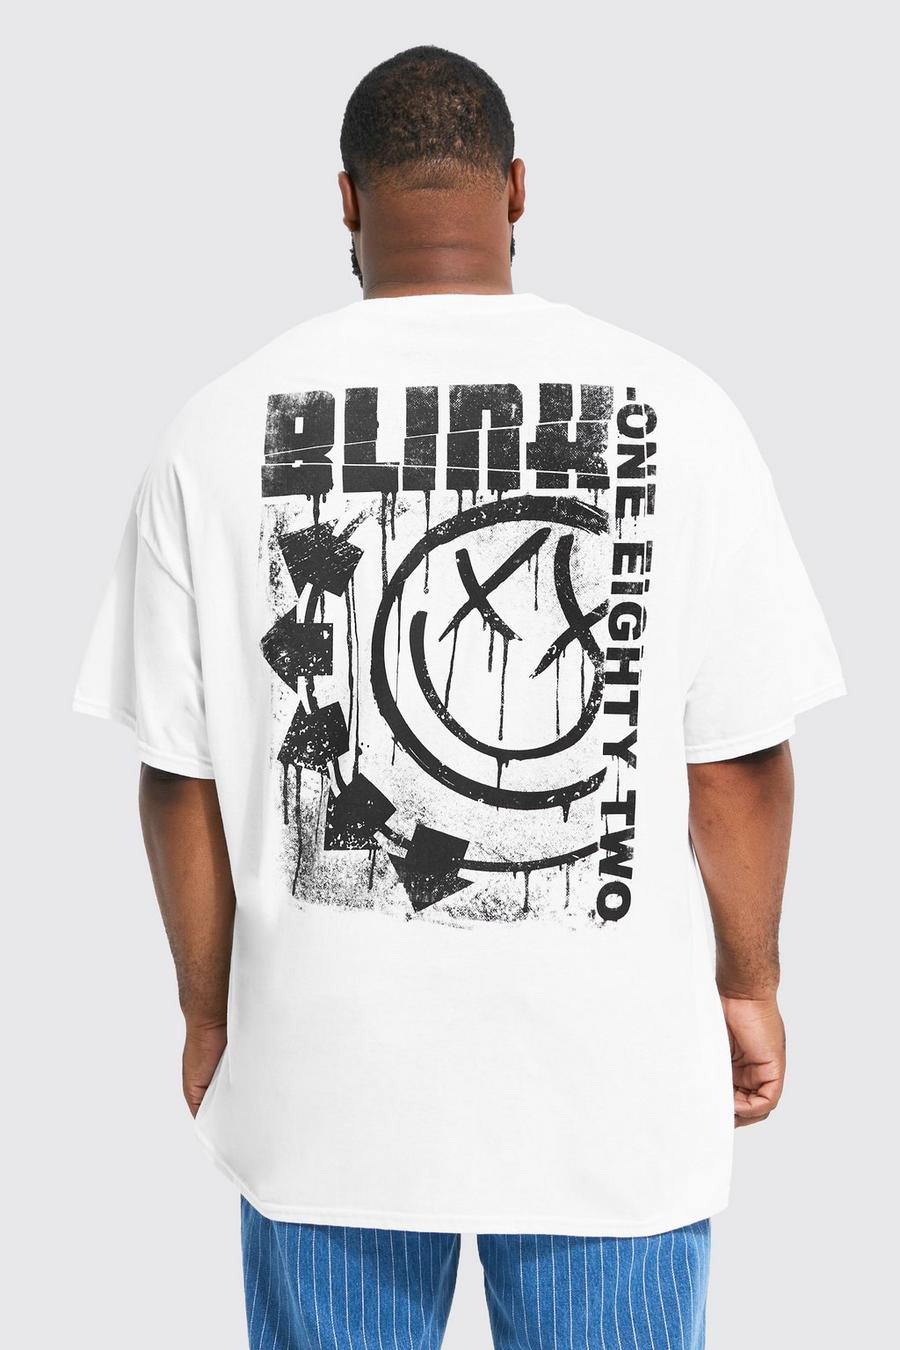 T-shirt Plus Size ufficiale dei Blink 182, White image number 1